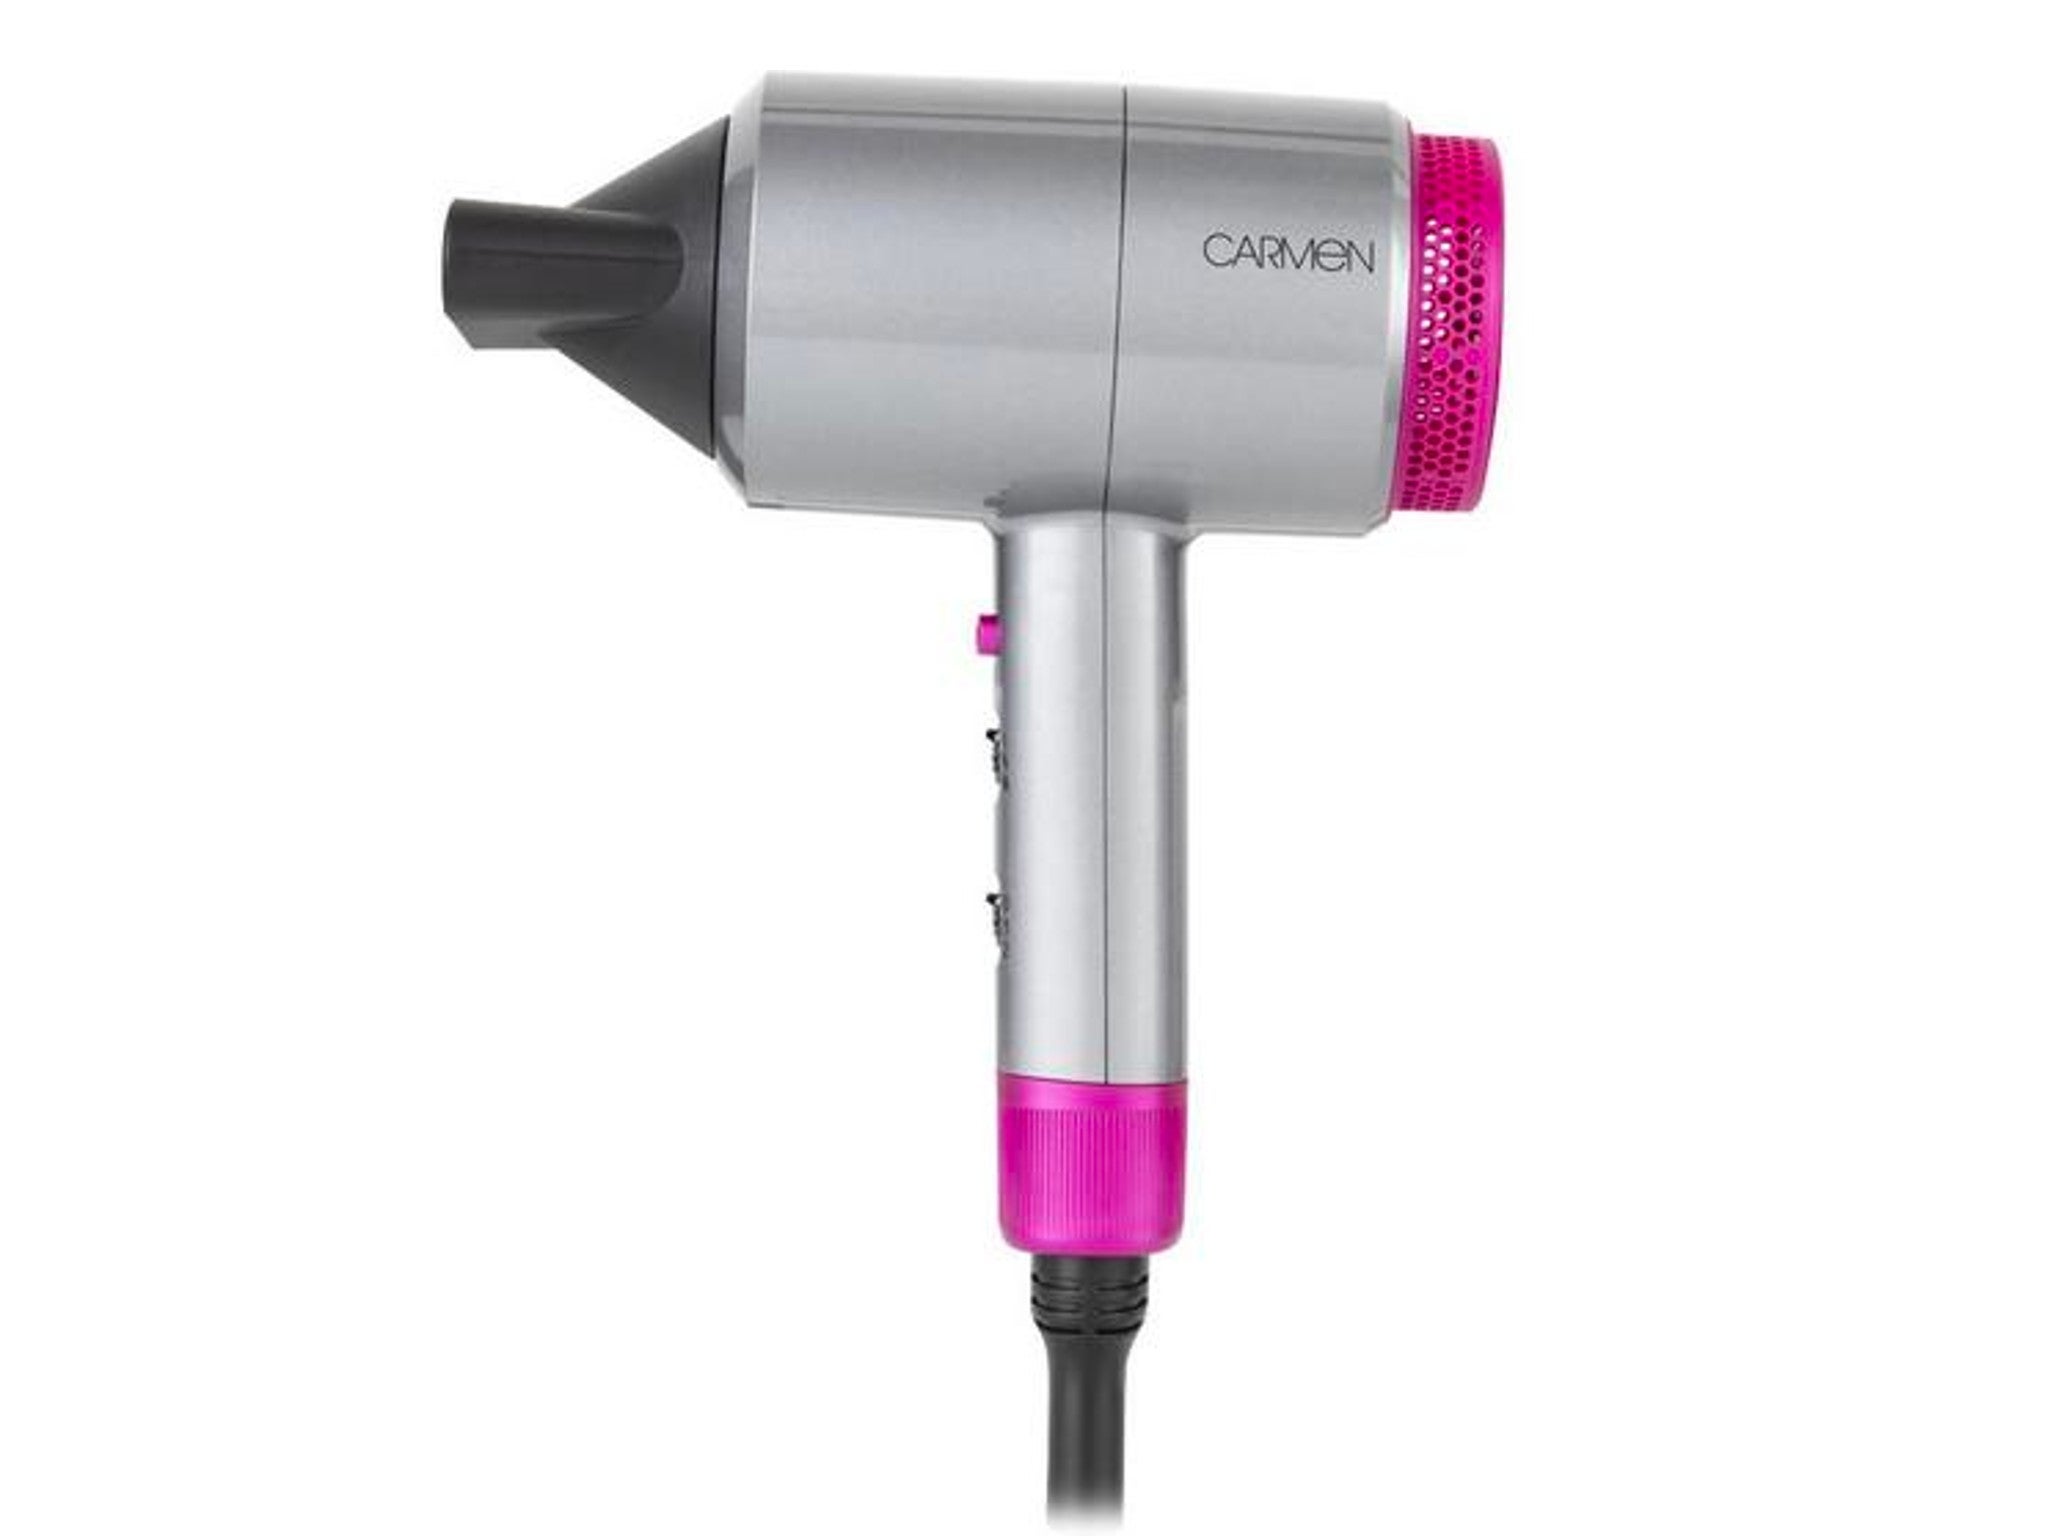 This Dyson hairdryer dupe costs just £20